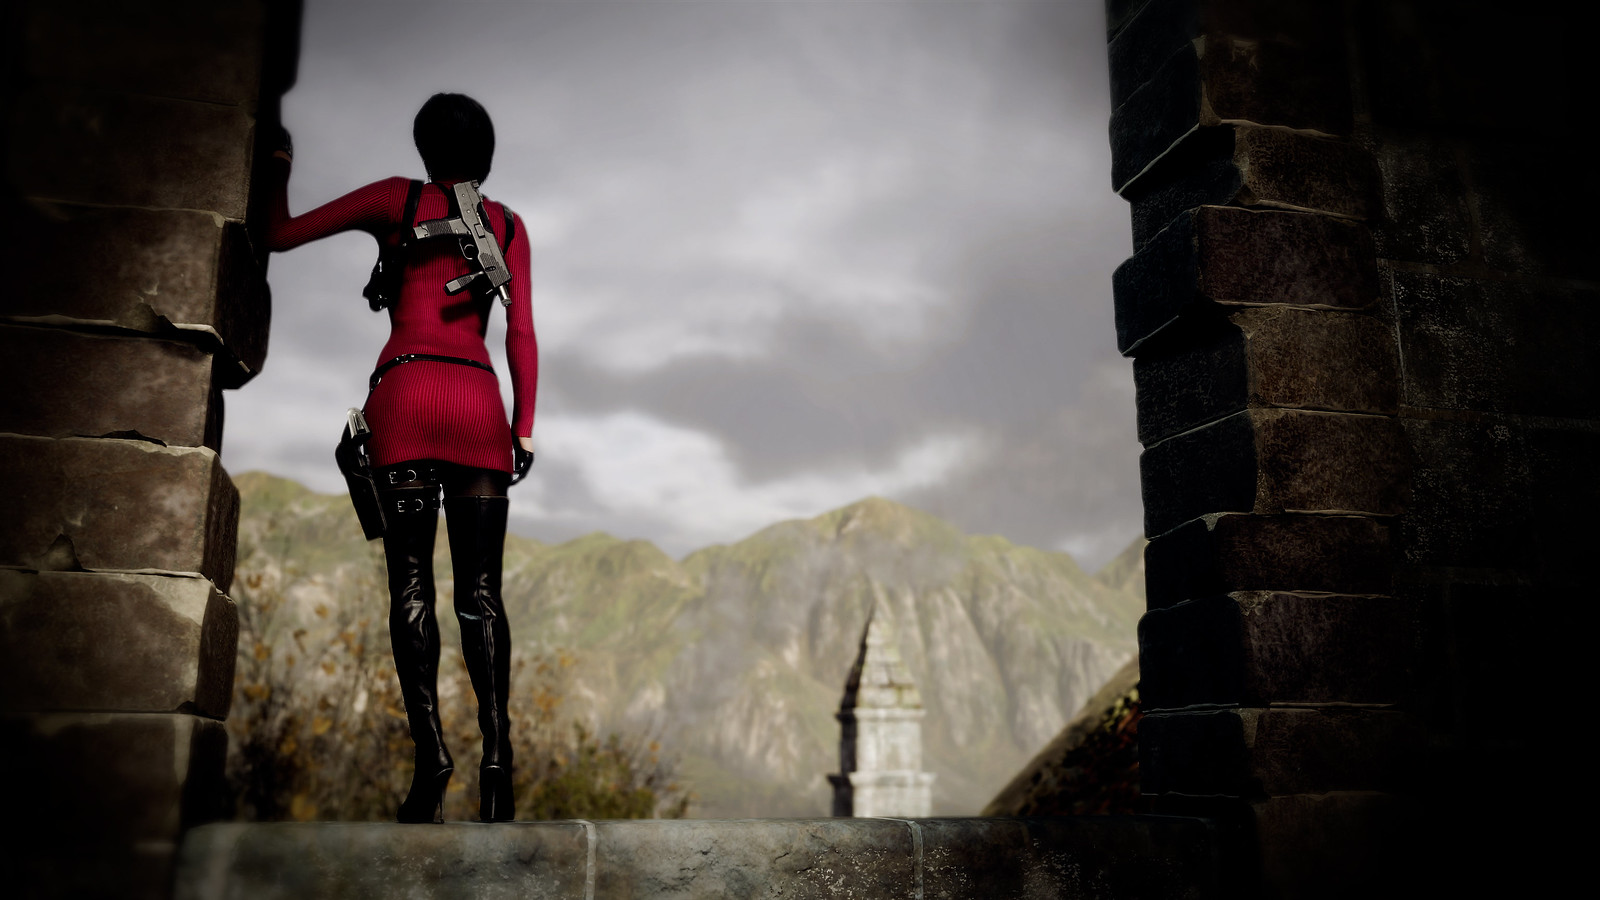 With her back to the camera, Ada Wong stands atop a wall, looking out over the surroundings below.